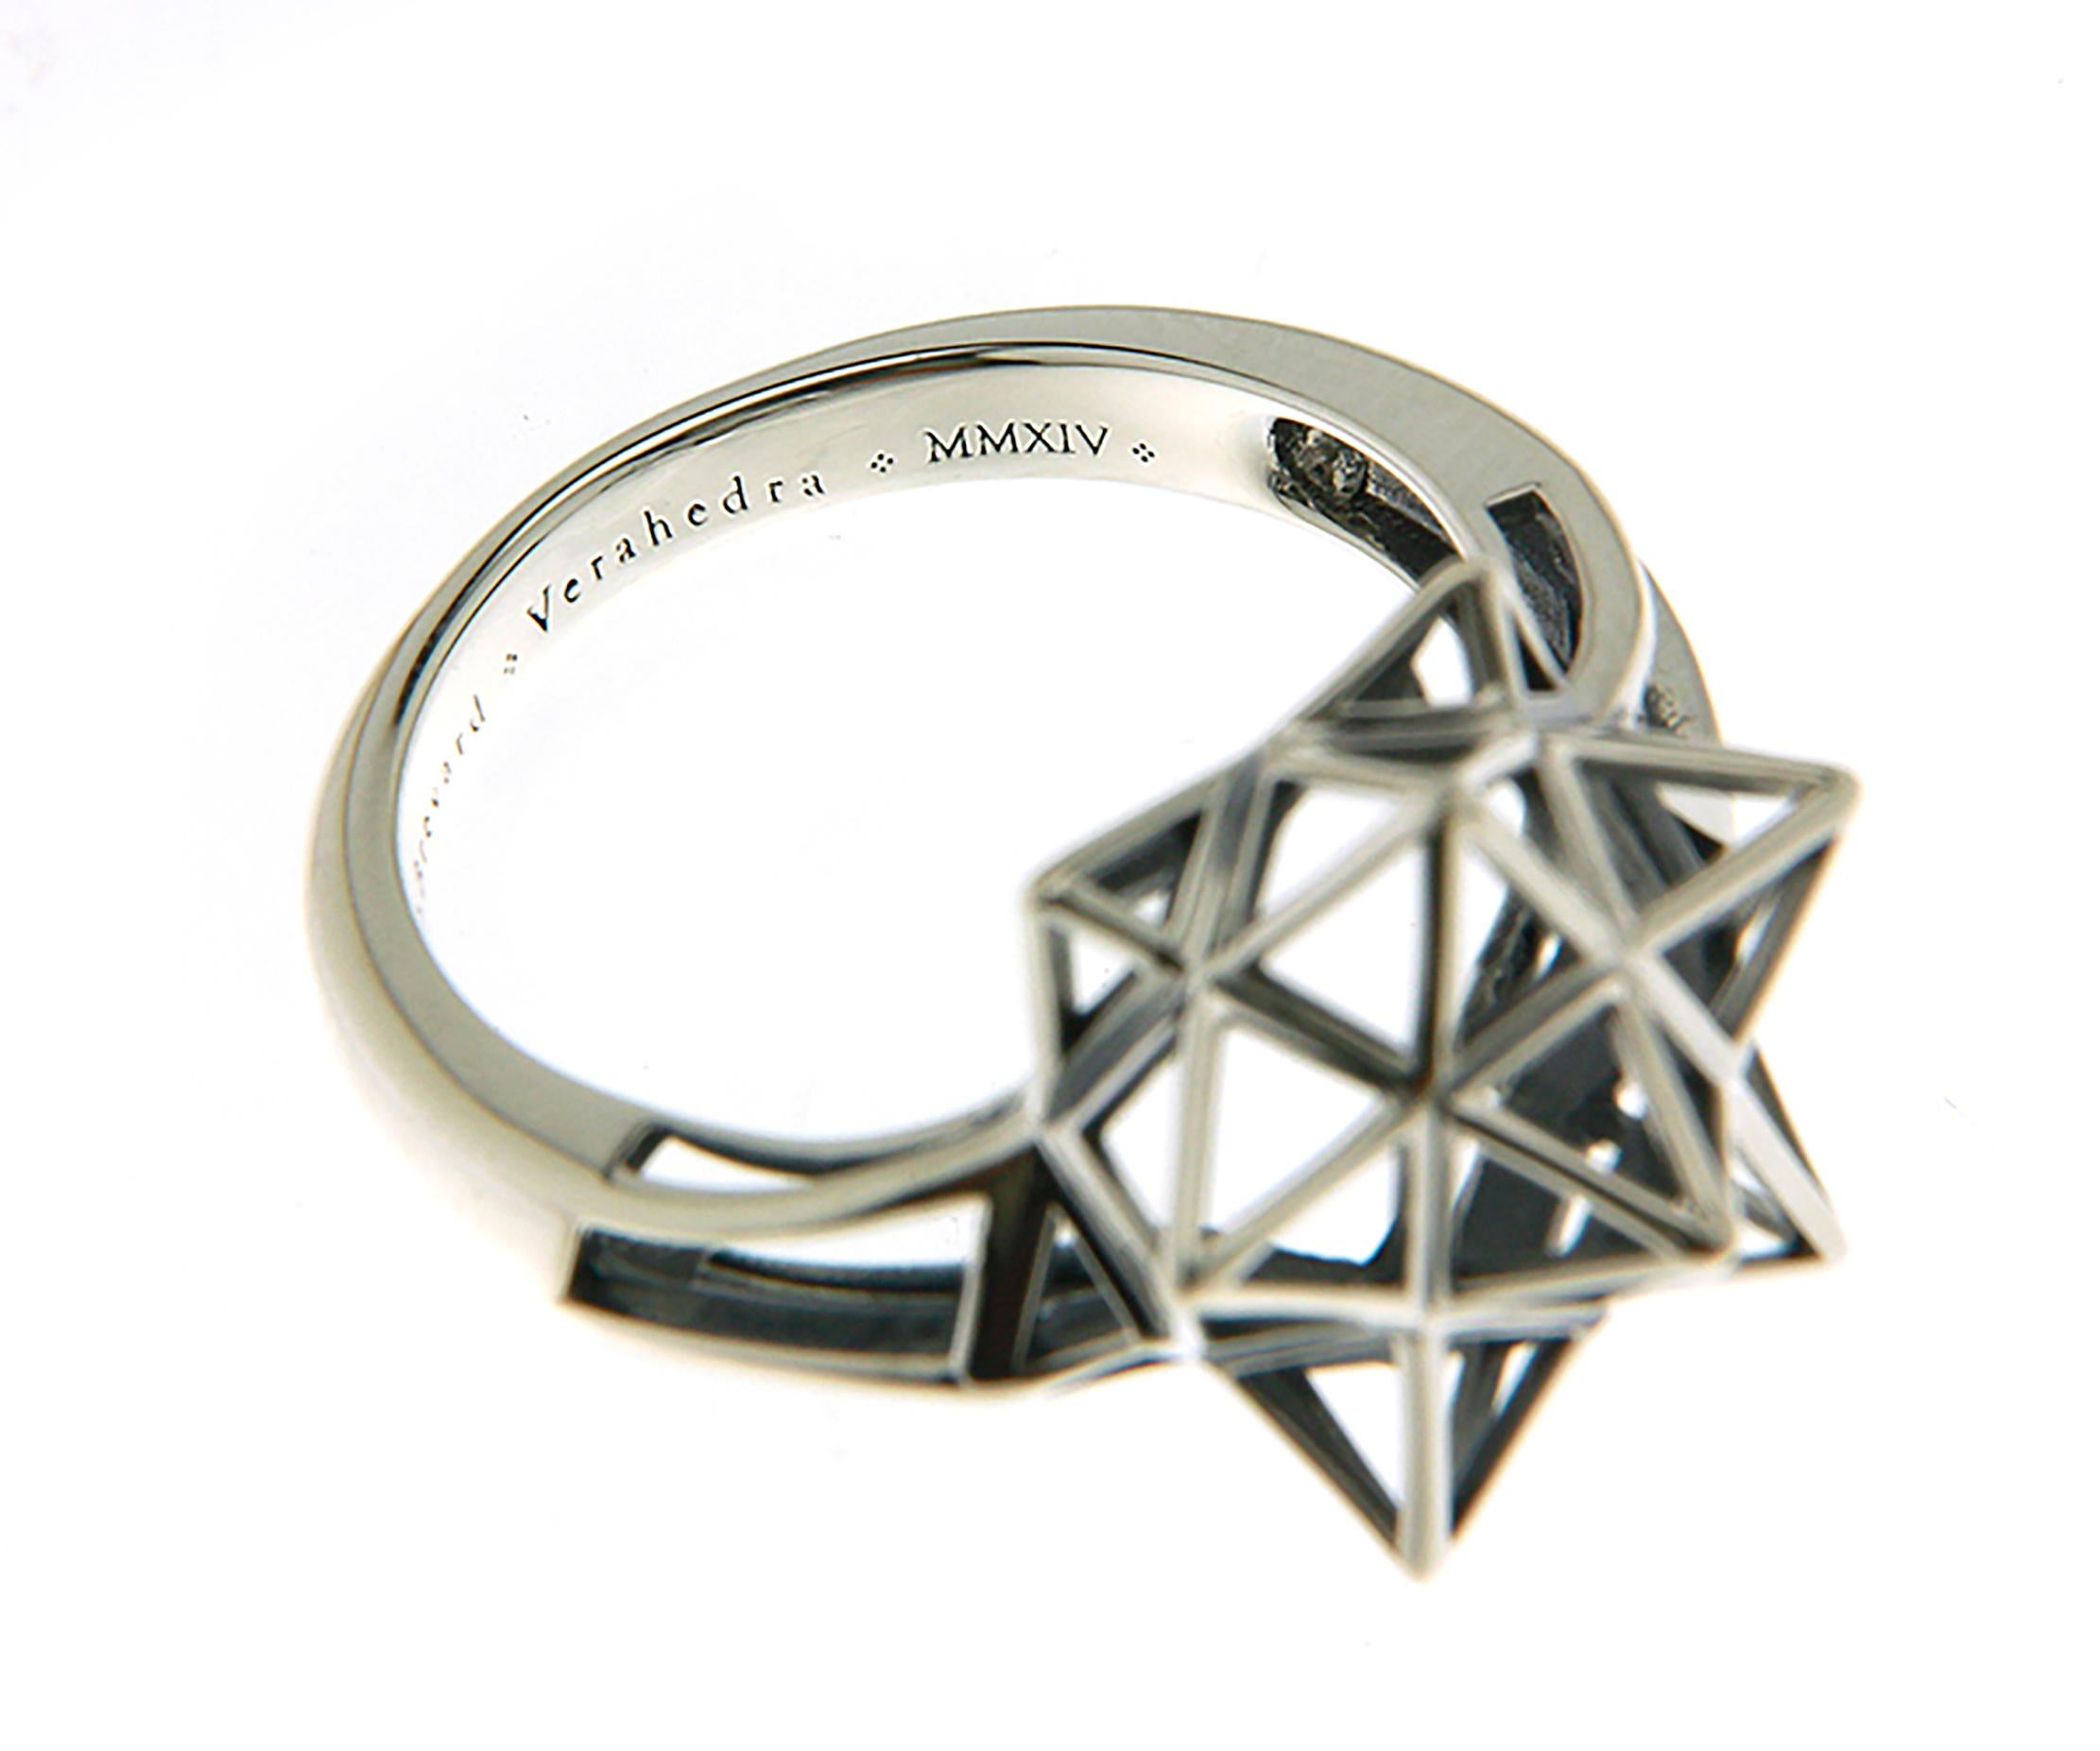 This Verahedra collection ring in sterling silver with a black sapphire at 4mm is an elegant yet casual statement.

Verahedra Collection: A series of complex, interlocking geometries reminiscent of Euclidean geometries and ancient architecture from